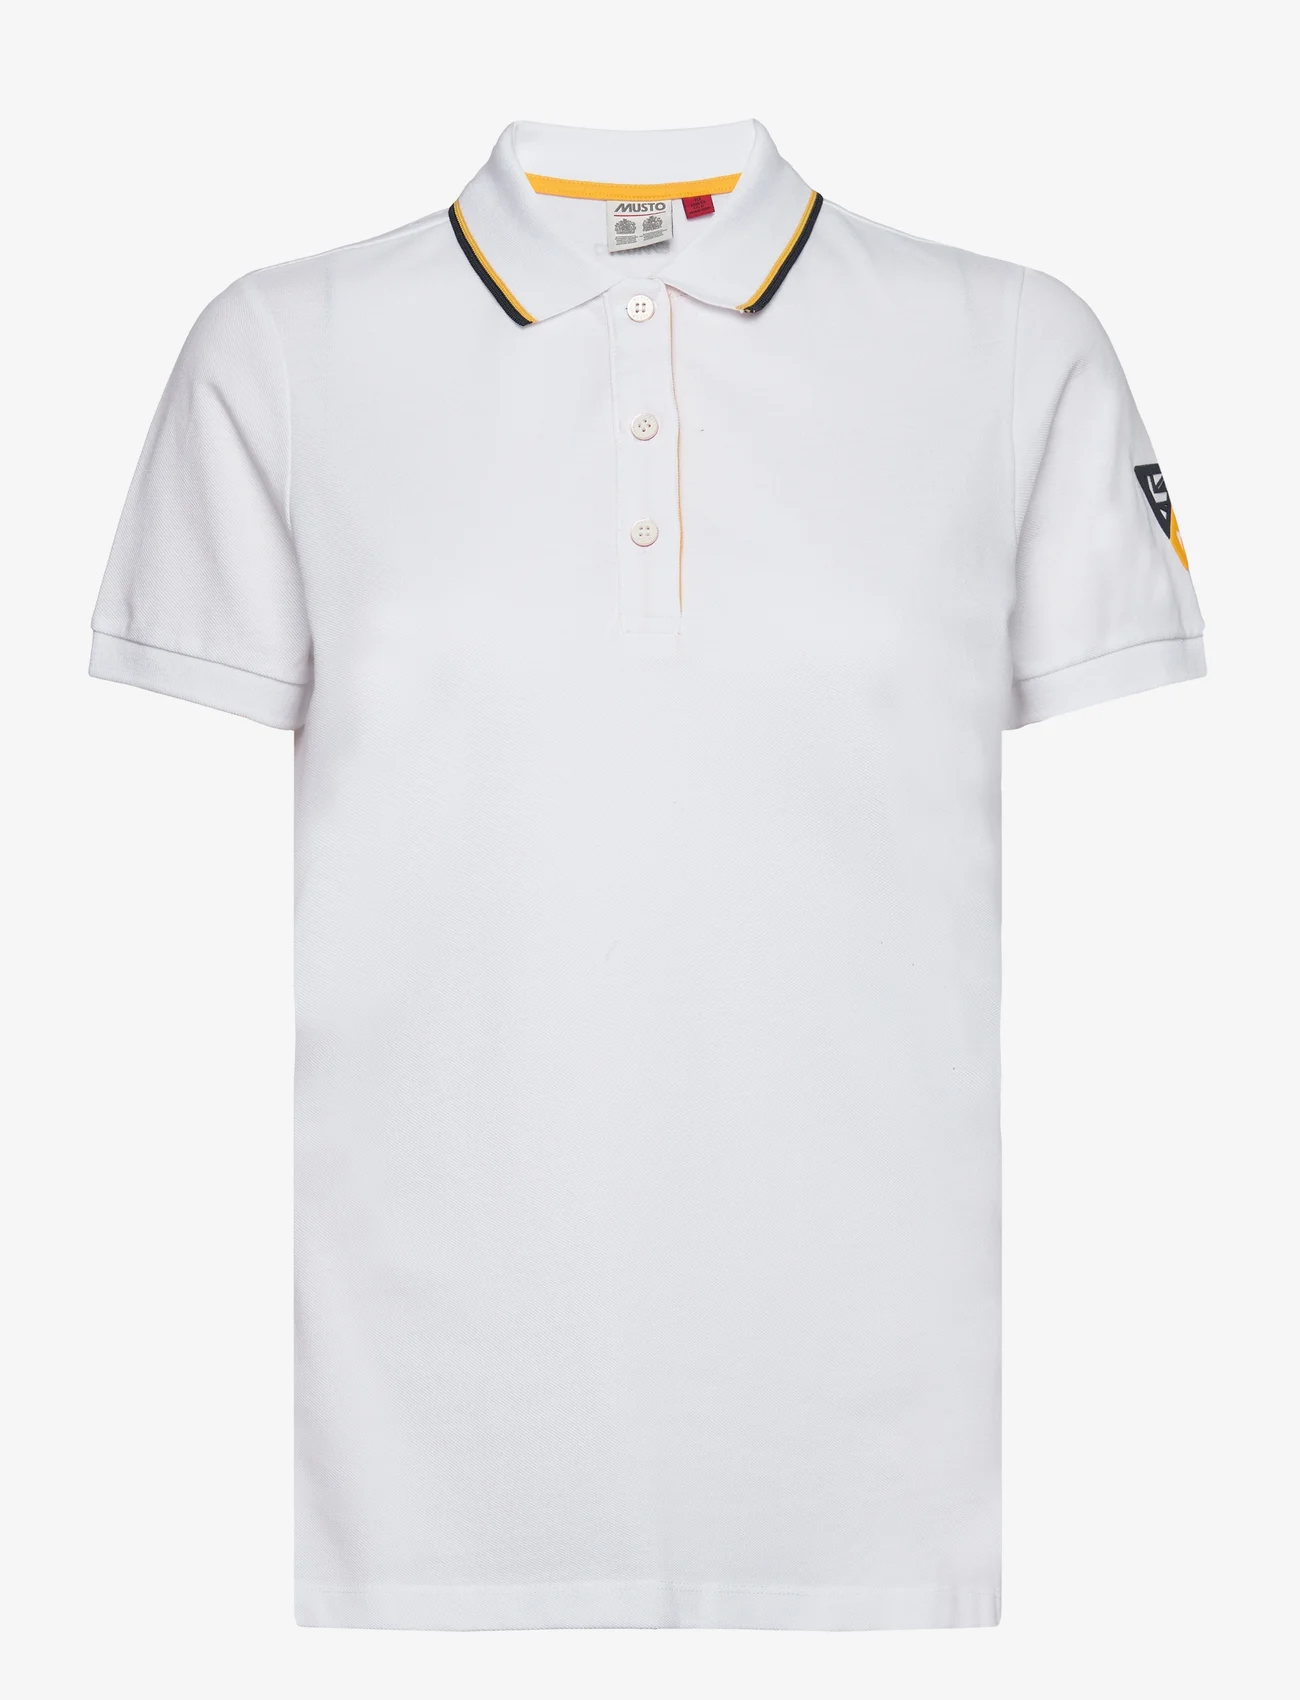 Musto - W MUSTO POLO 2.0 - t-shirts & tops - white - 0